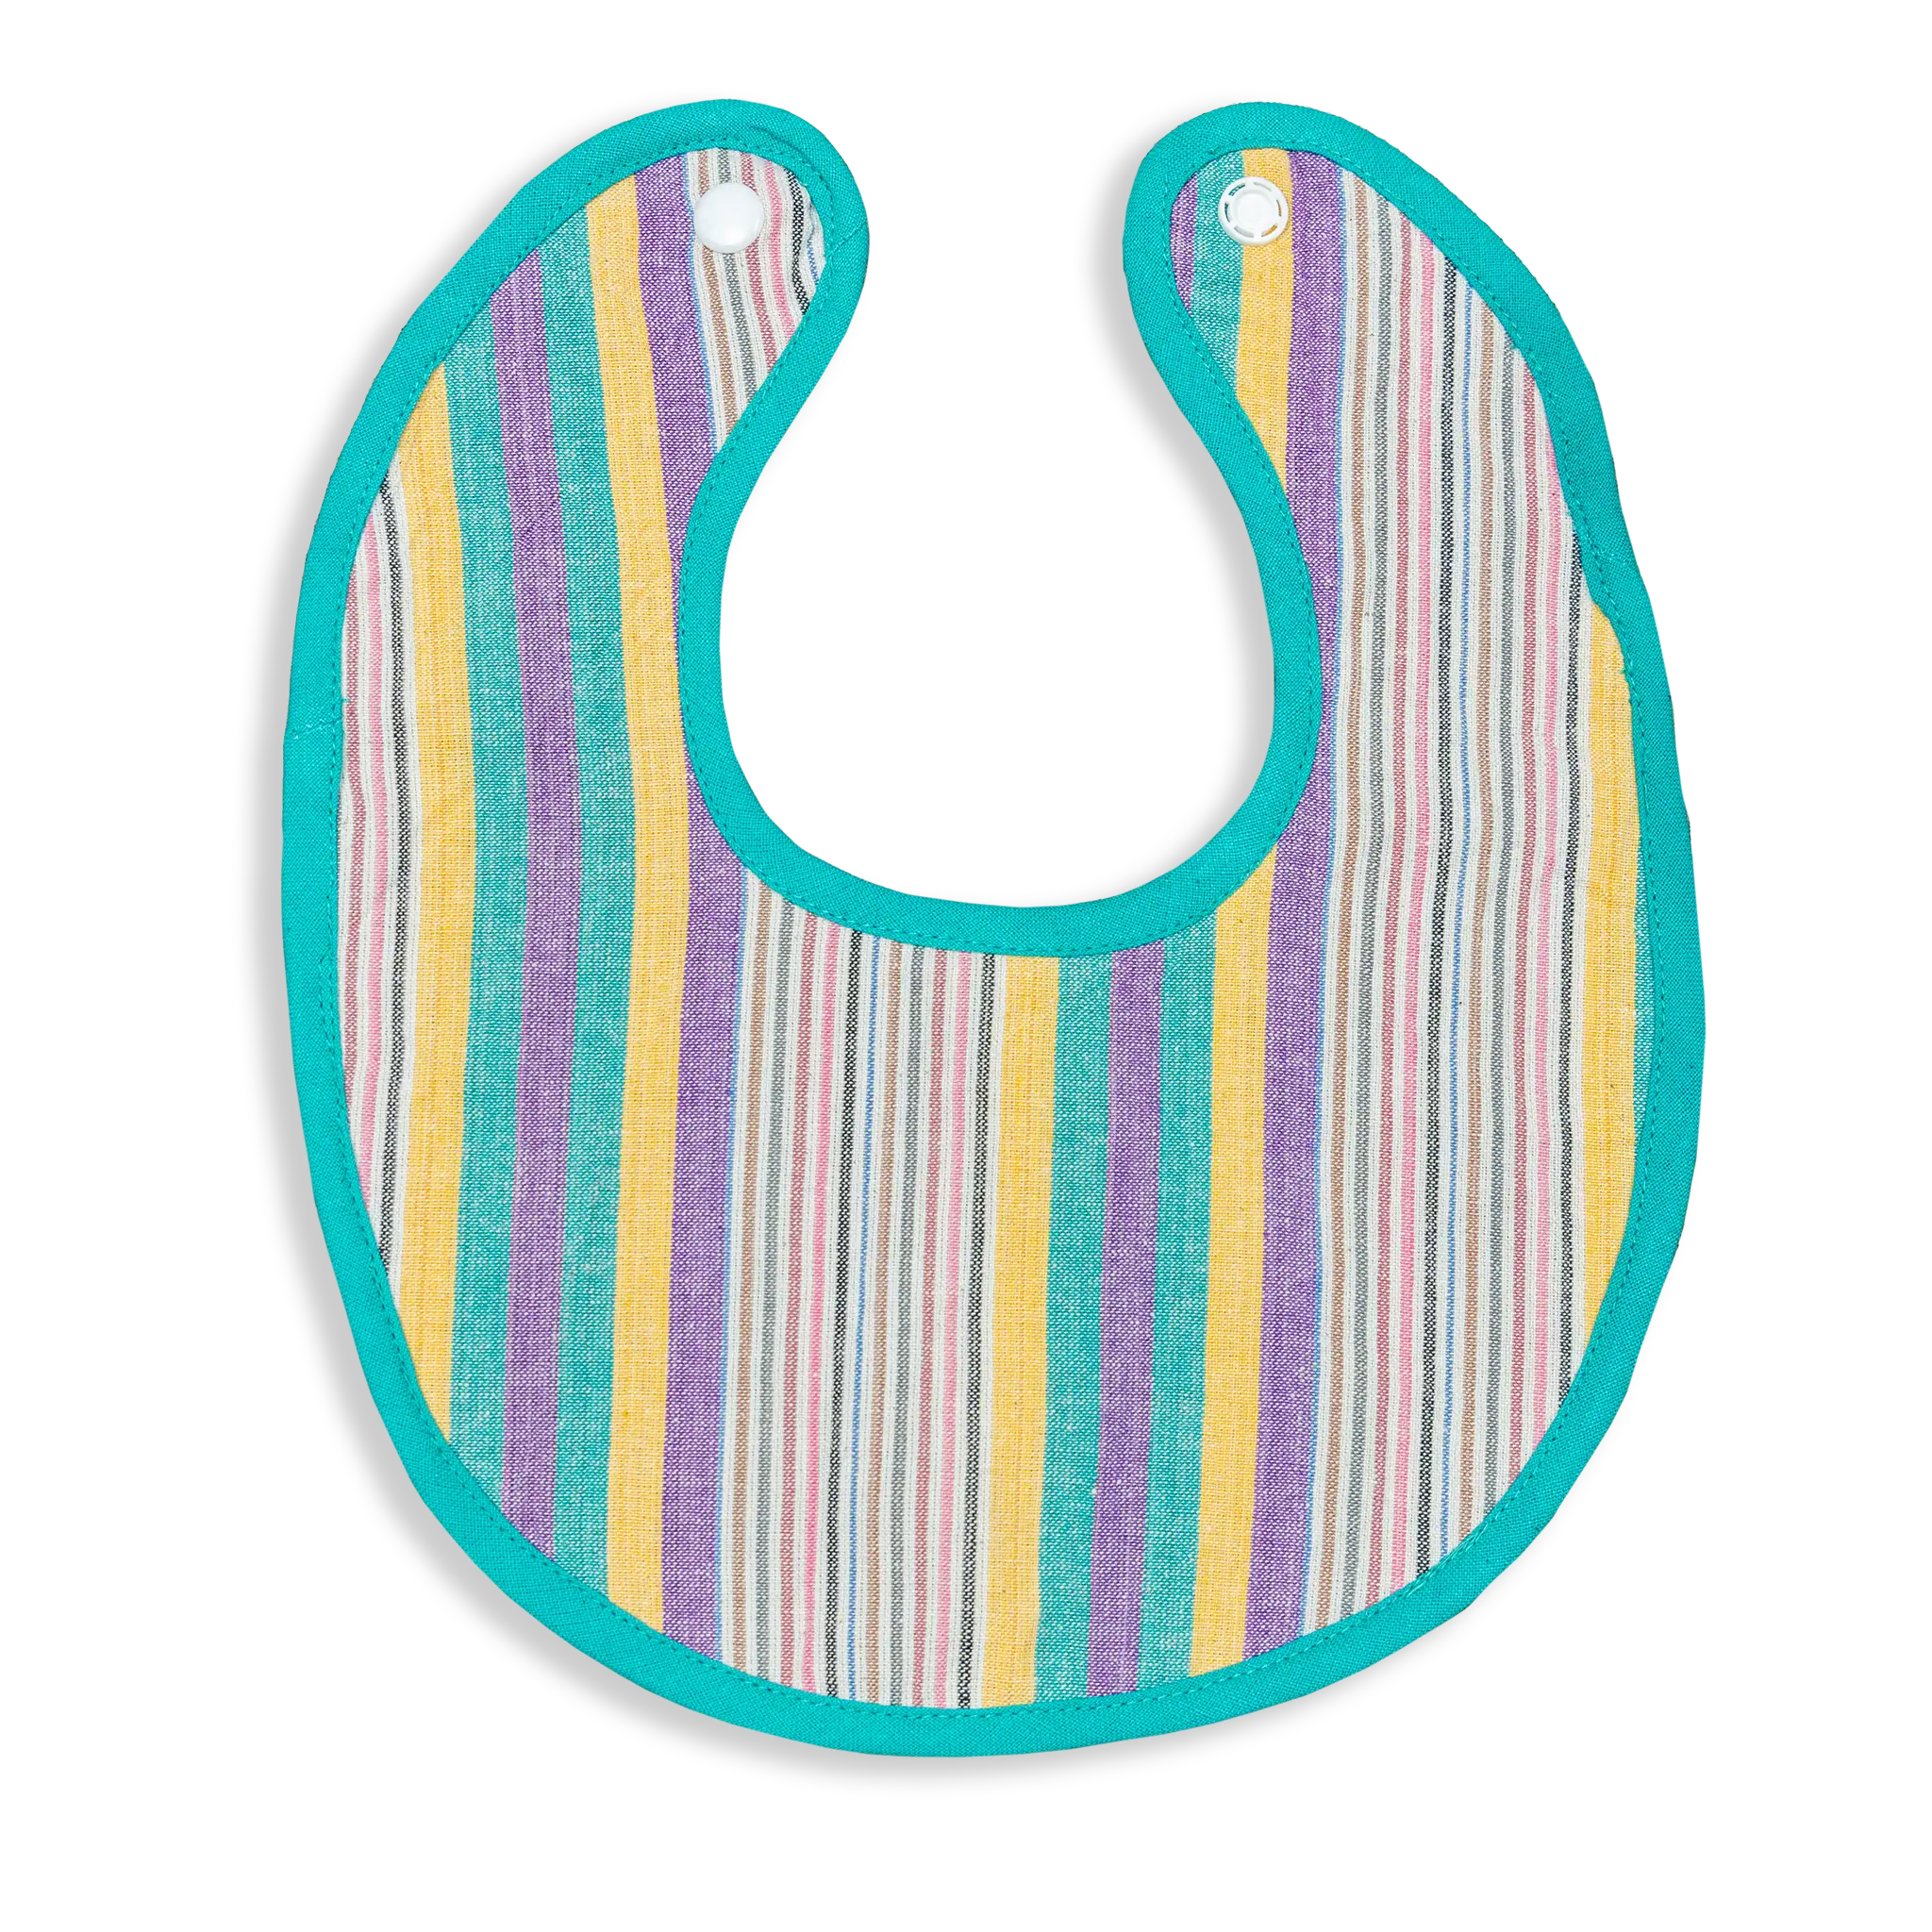 Keep your little one clean and comfortable with our Drooling Bibs! Crafted from 100% cotton, these bibs feature a beautiful colour, and super soft fabric. Perfect for keeping your baby's clothes mess-free and looking cute. Get ready to sail through teething years with Drooling Bibs!